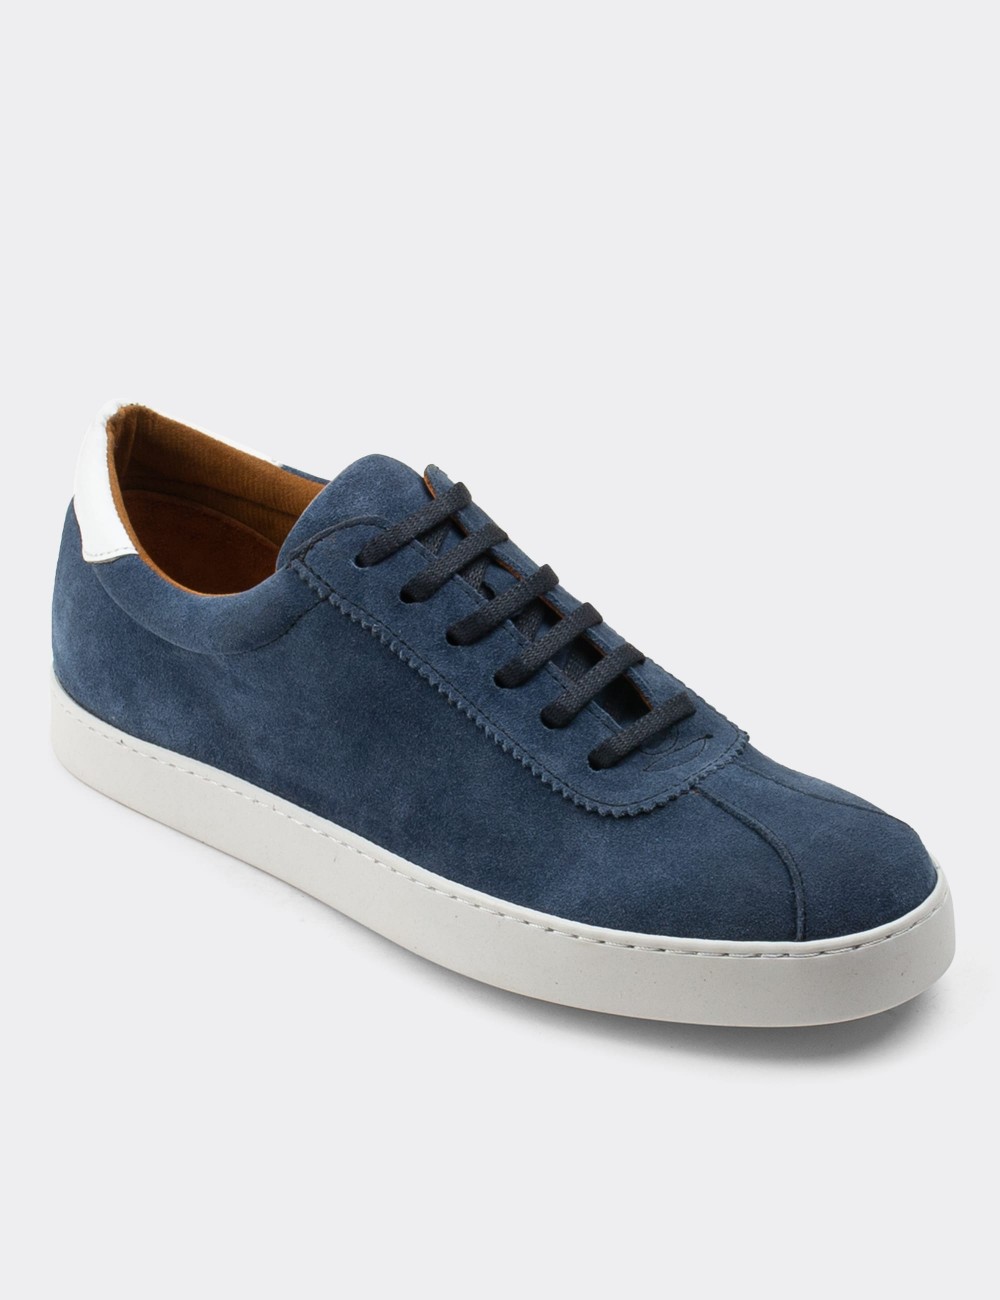 Blue Suede Leather Sneakers - 01885MMVIC01